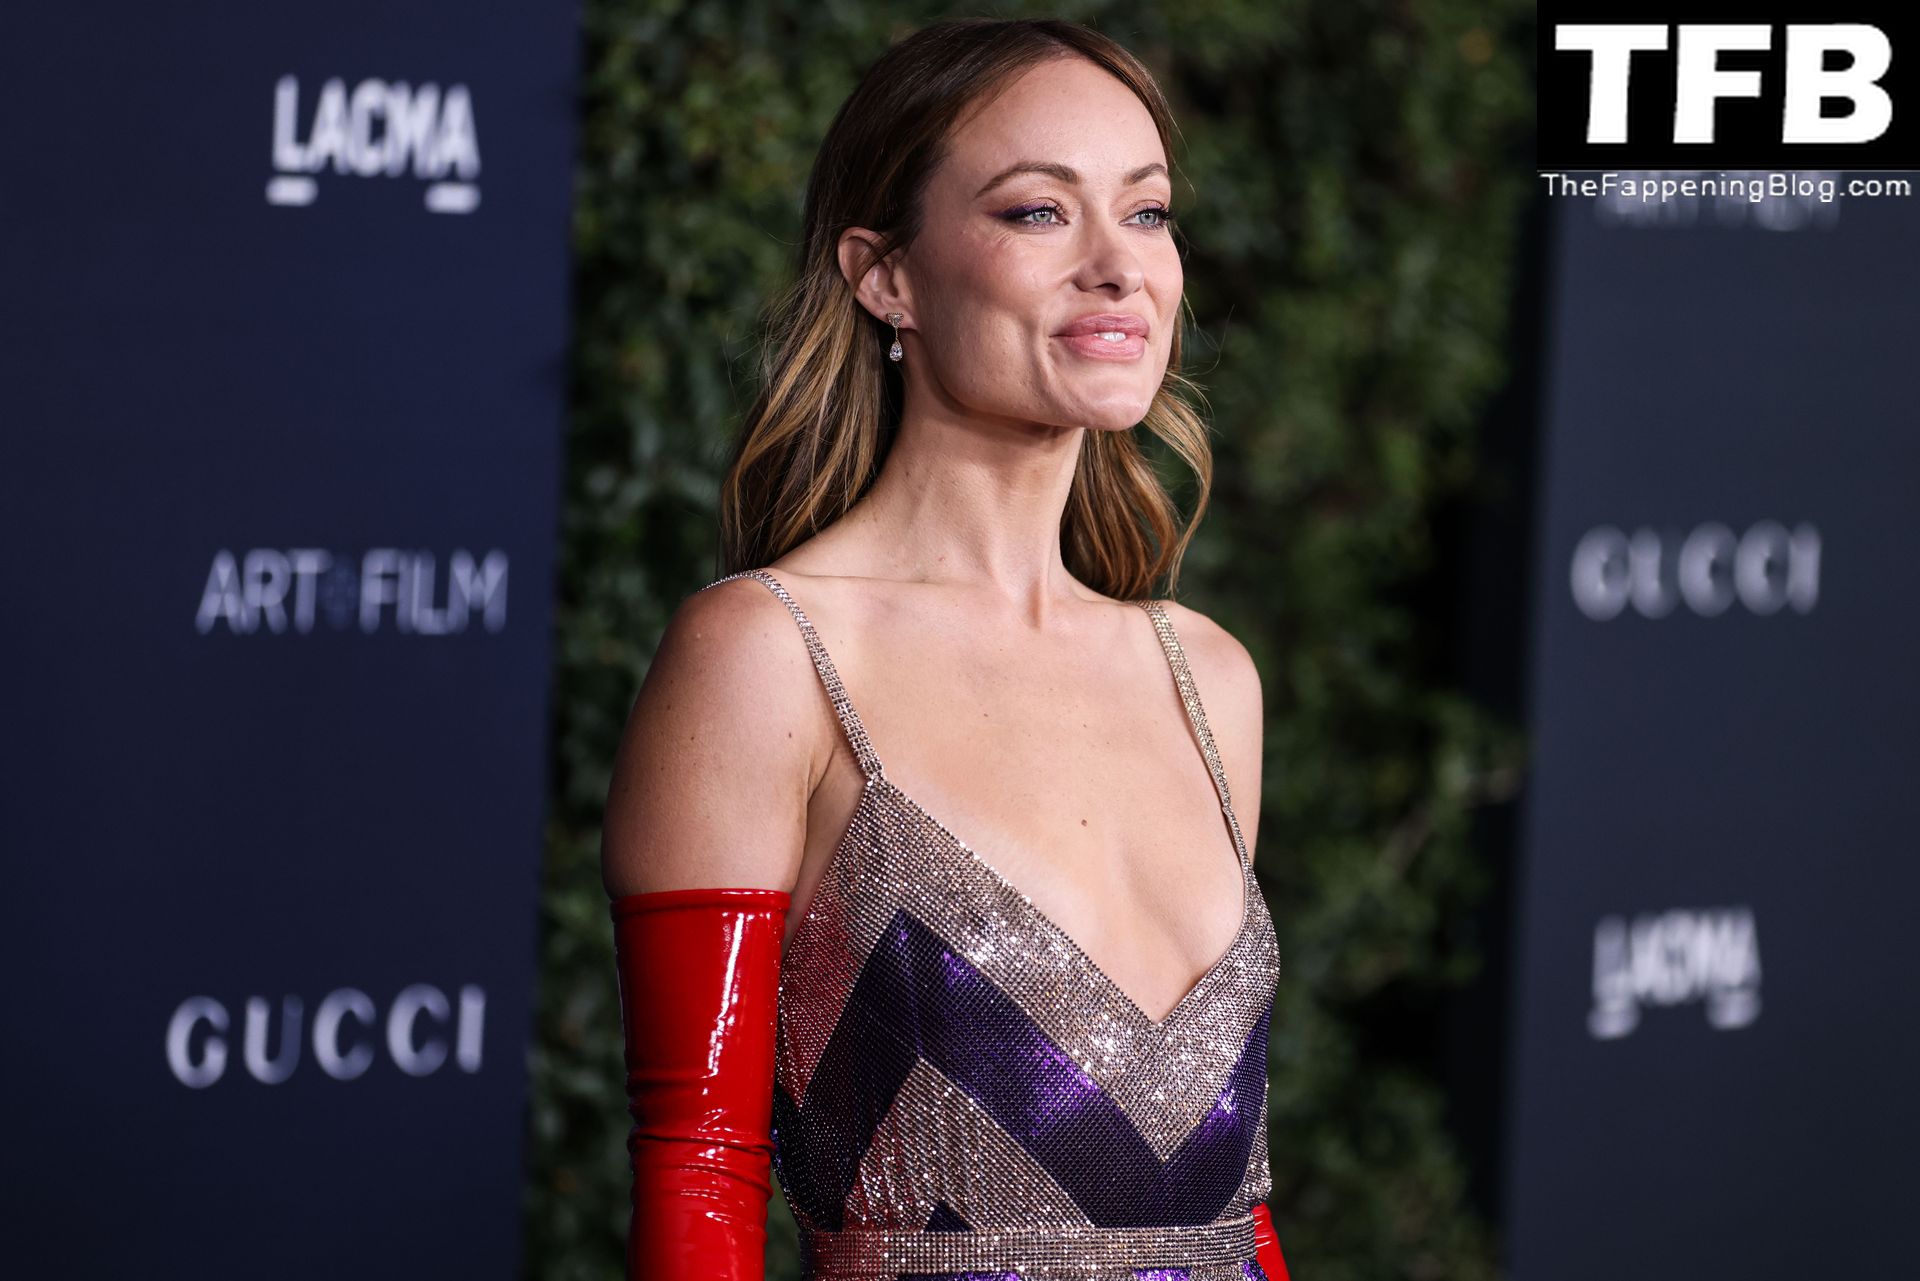 Olivia-Wilde-Sexy-The-Fappening-Blog-39.jpg